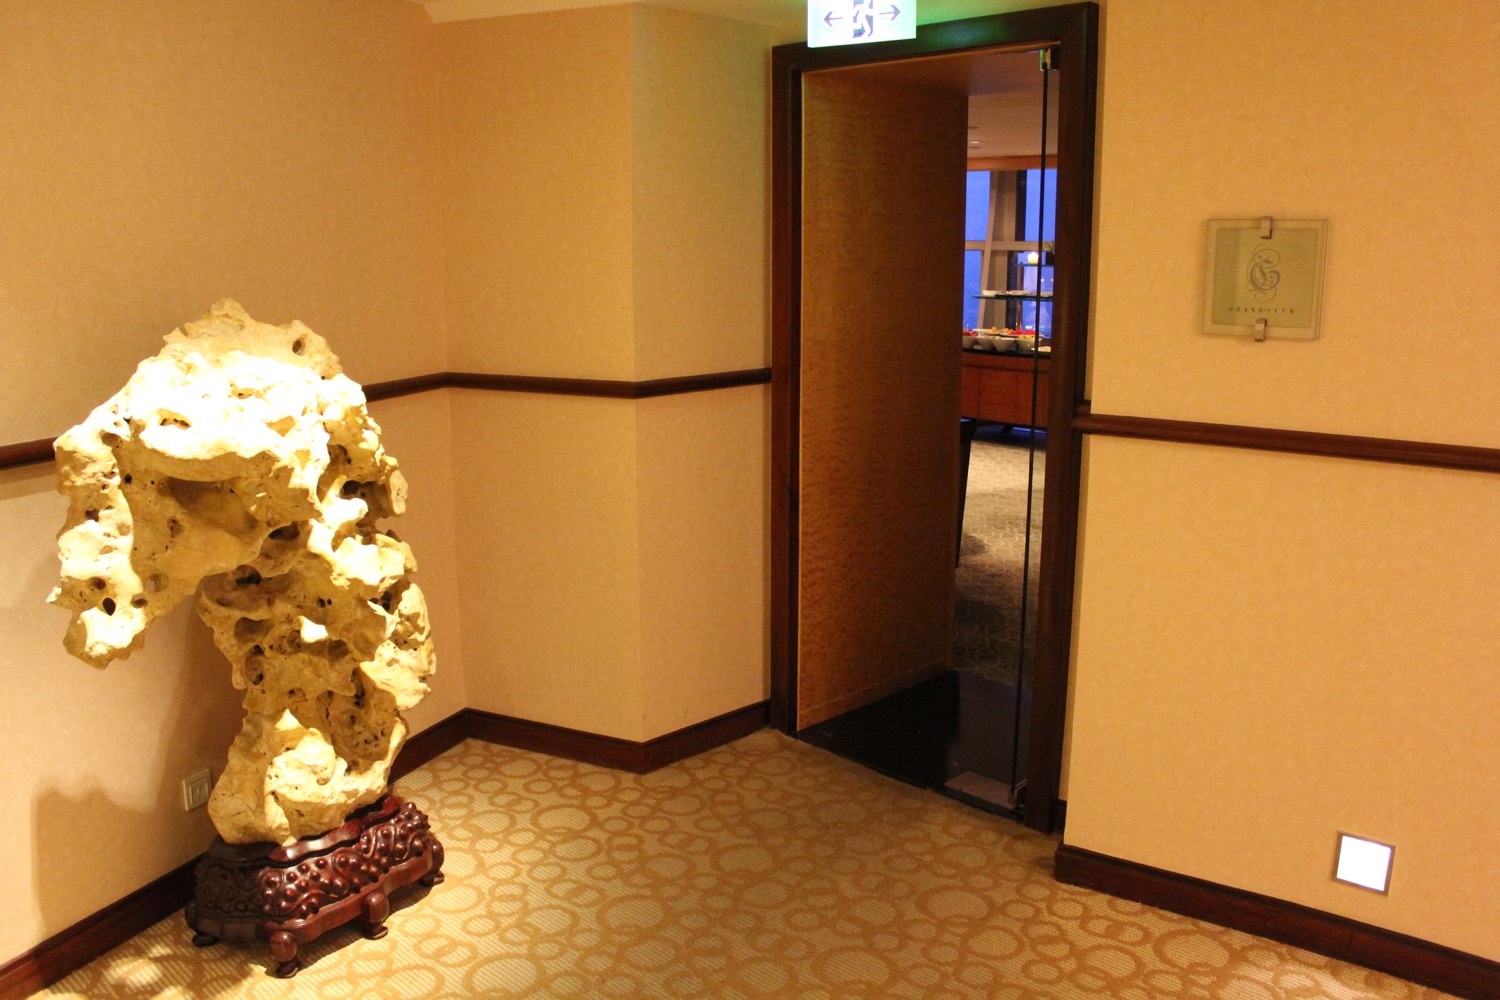 a large rock on a stand in a room